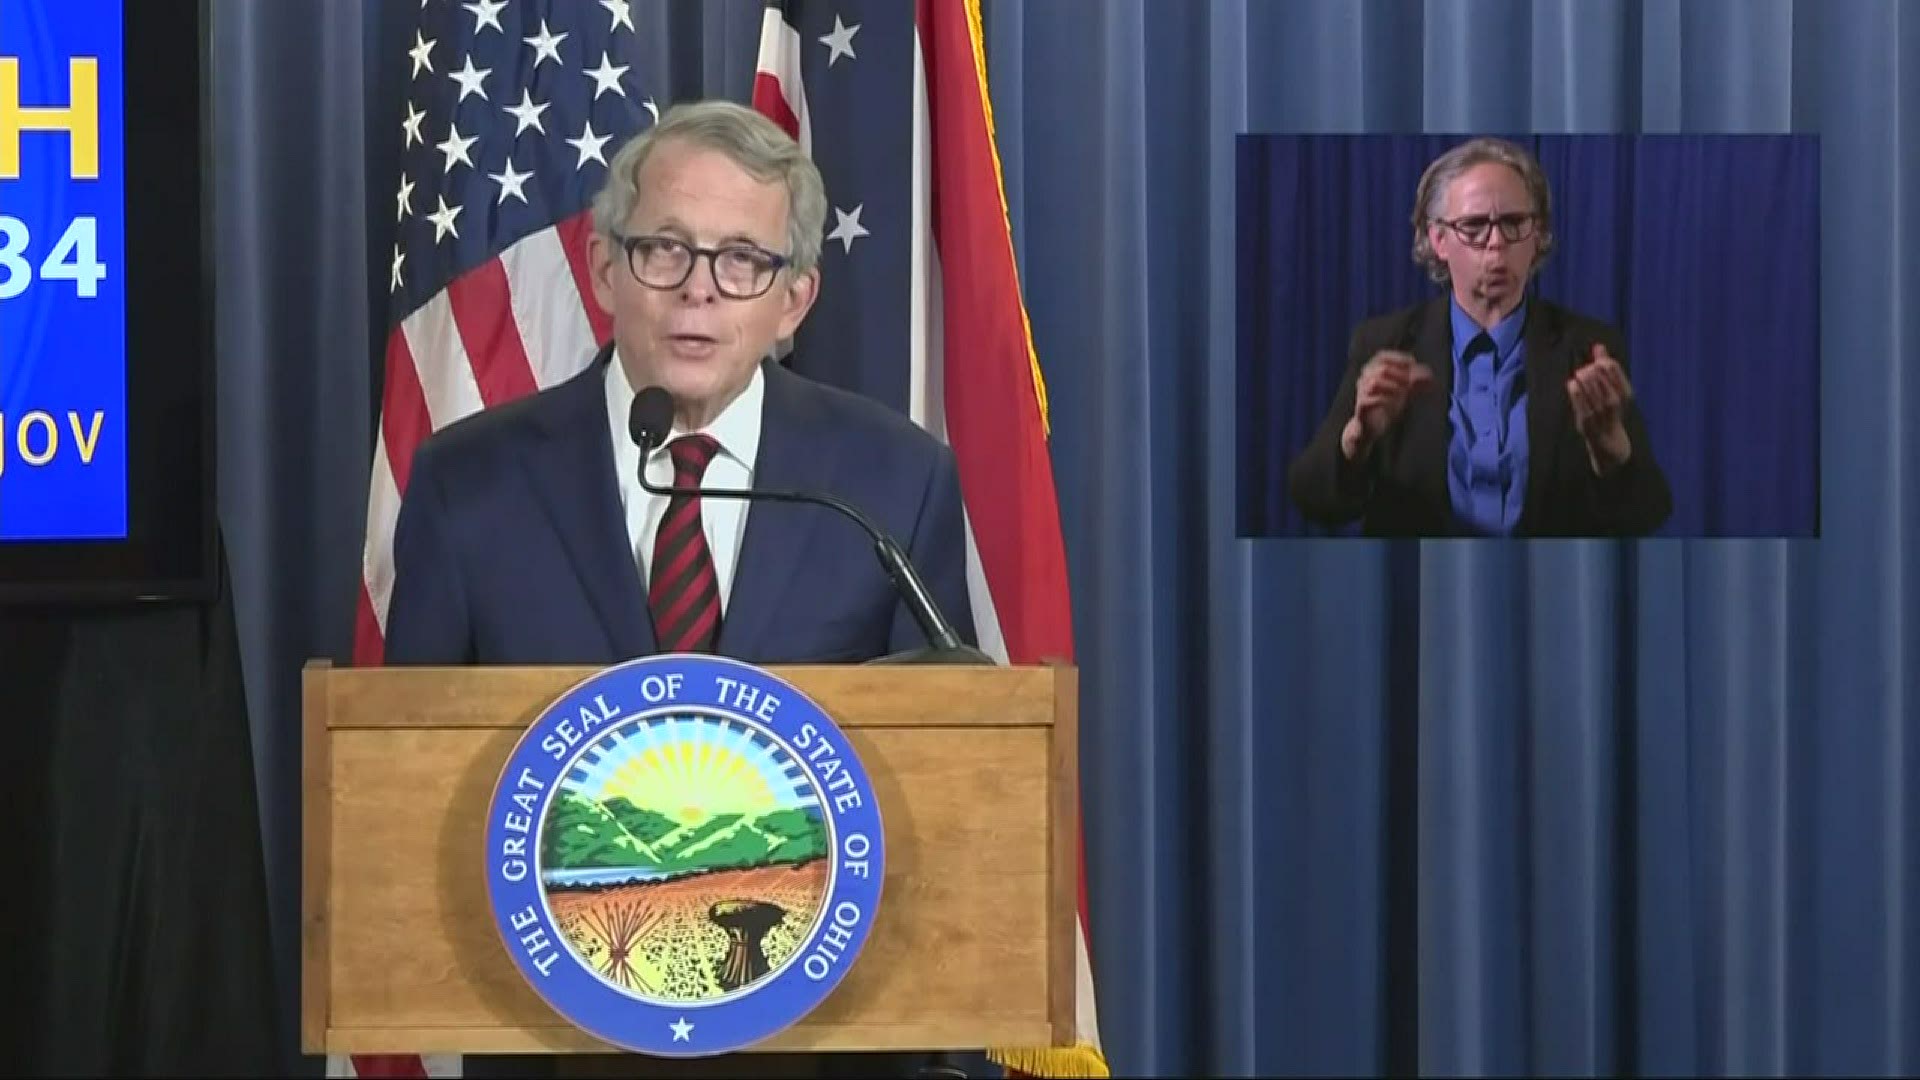 Hamilton and Montgomery counties are seeing spikes in COVID-19 hospitalizations. DeWine said he is getting help from White House to combat the issue.